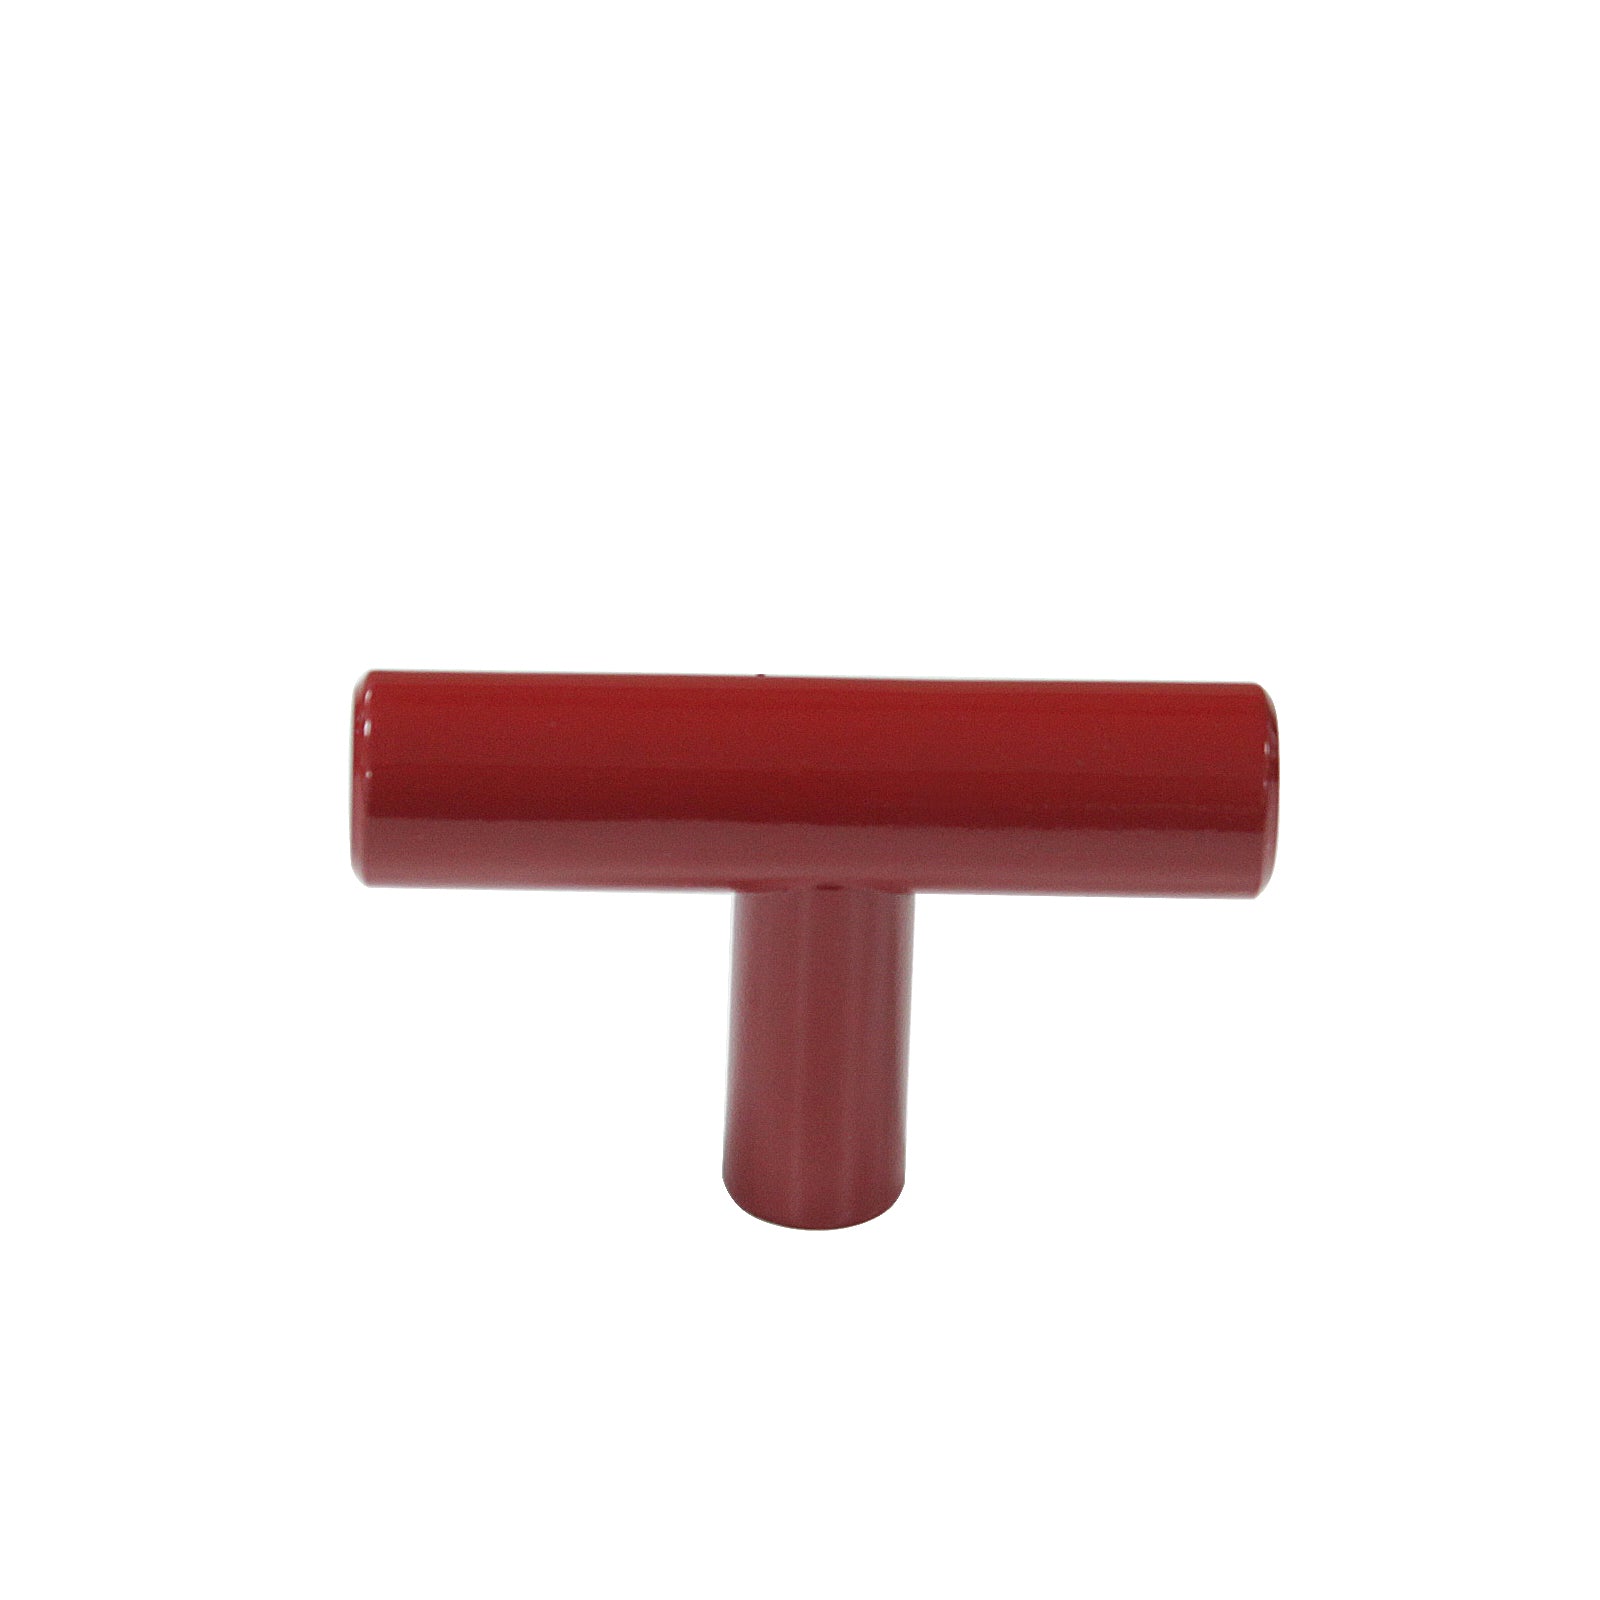 Stainless Steel T Bar Pulls Red Finish, Single Hole Handles 2inch Length